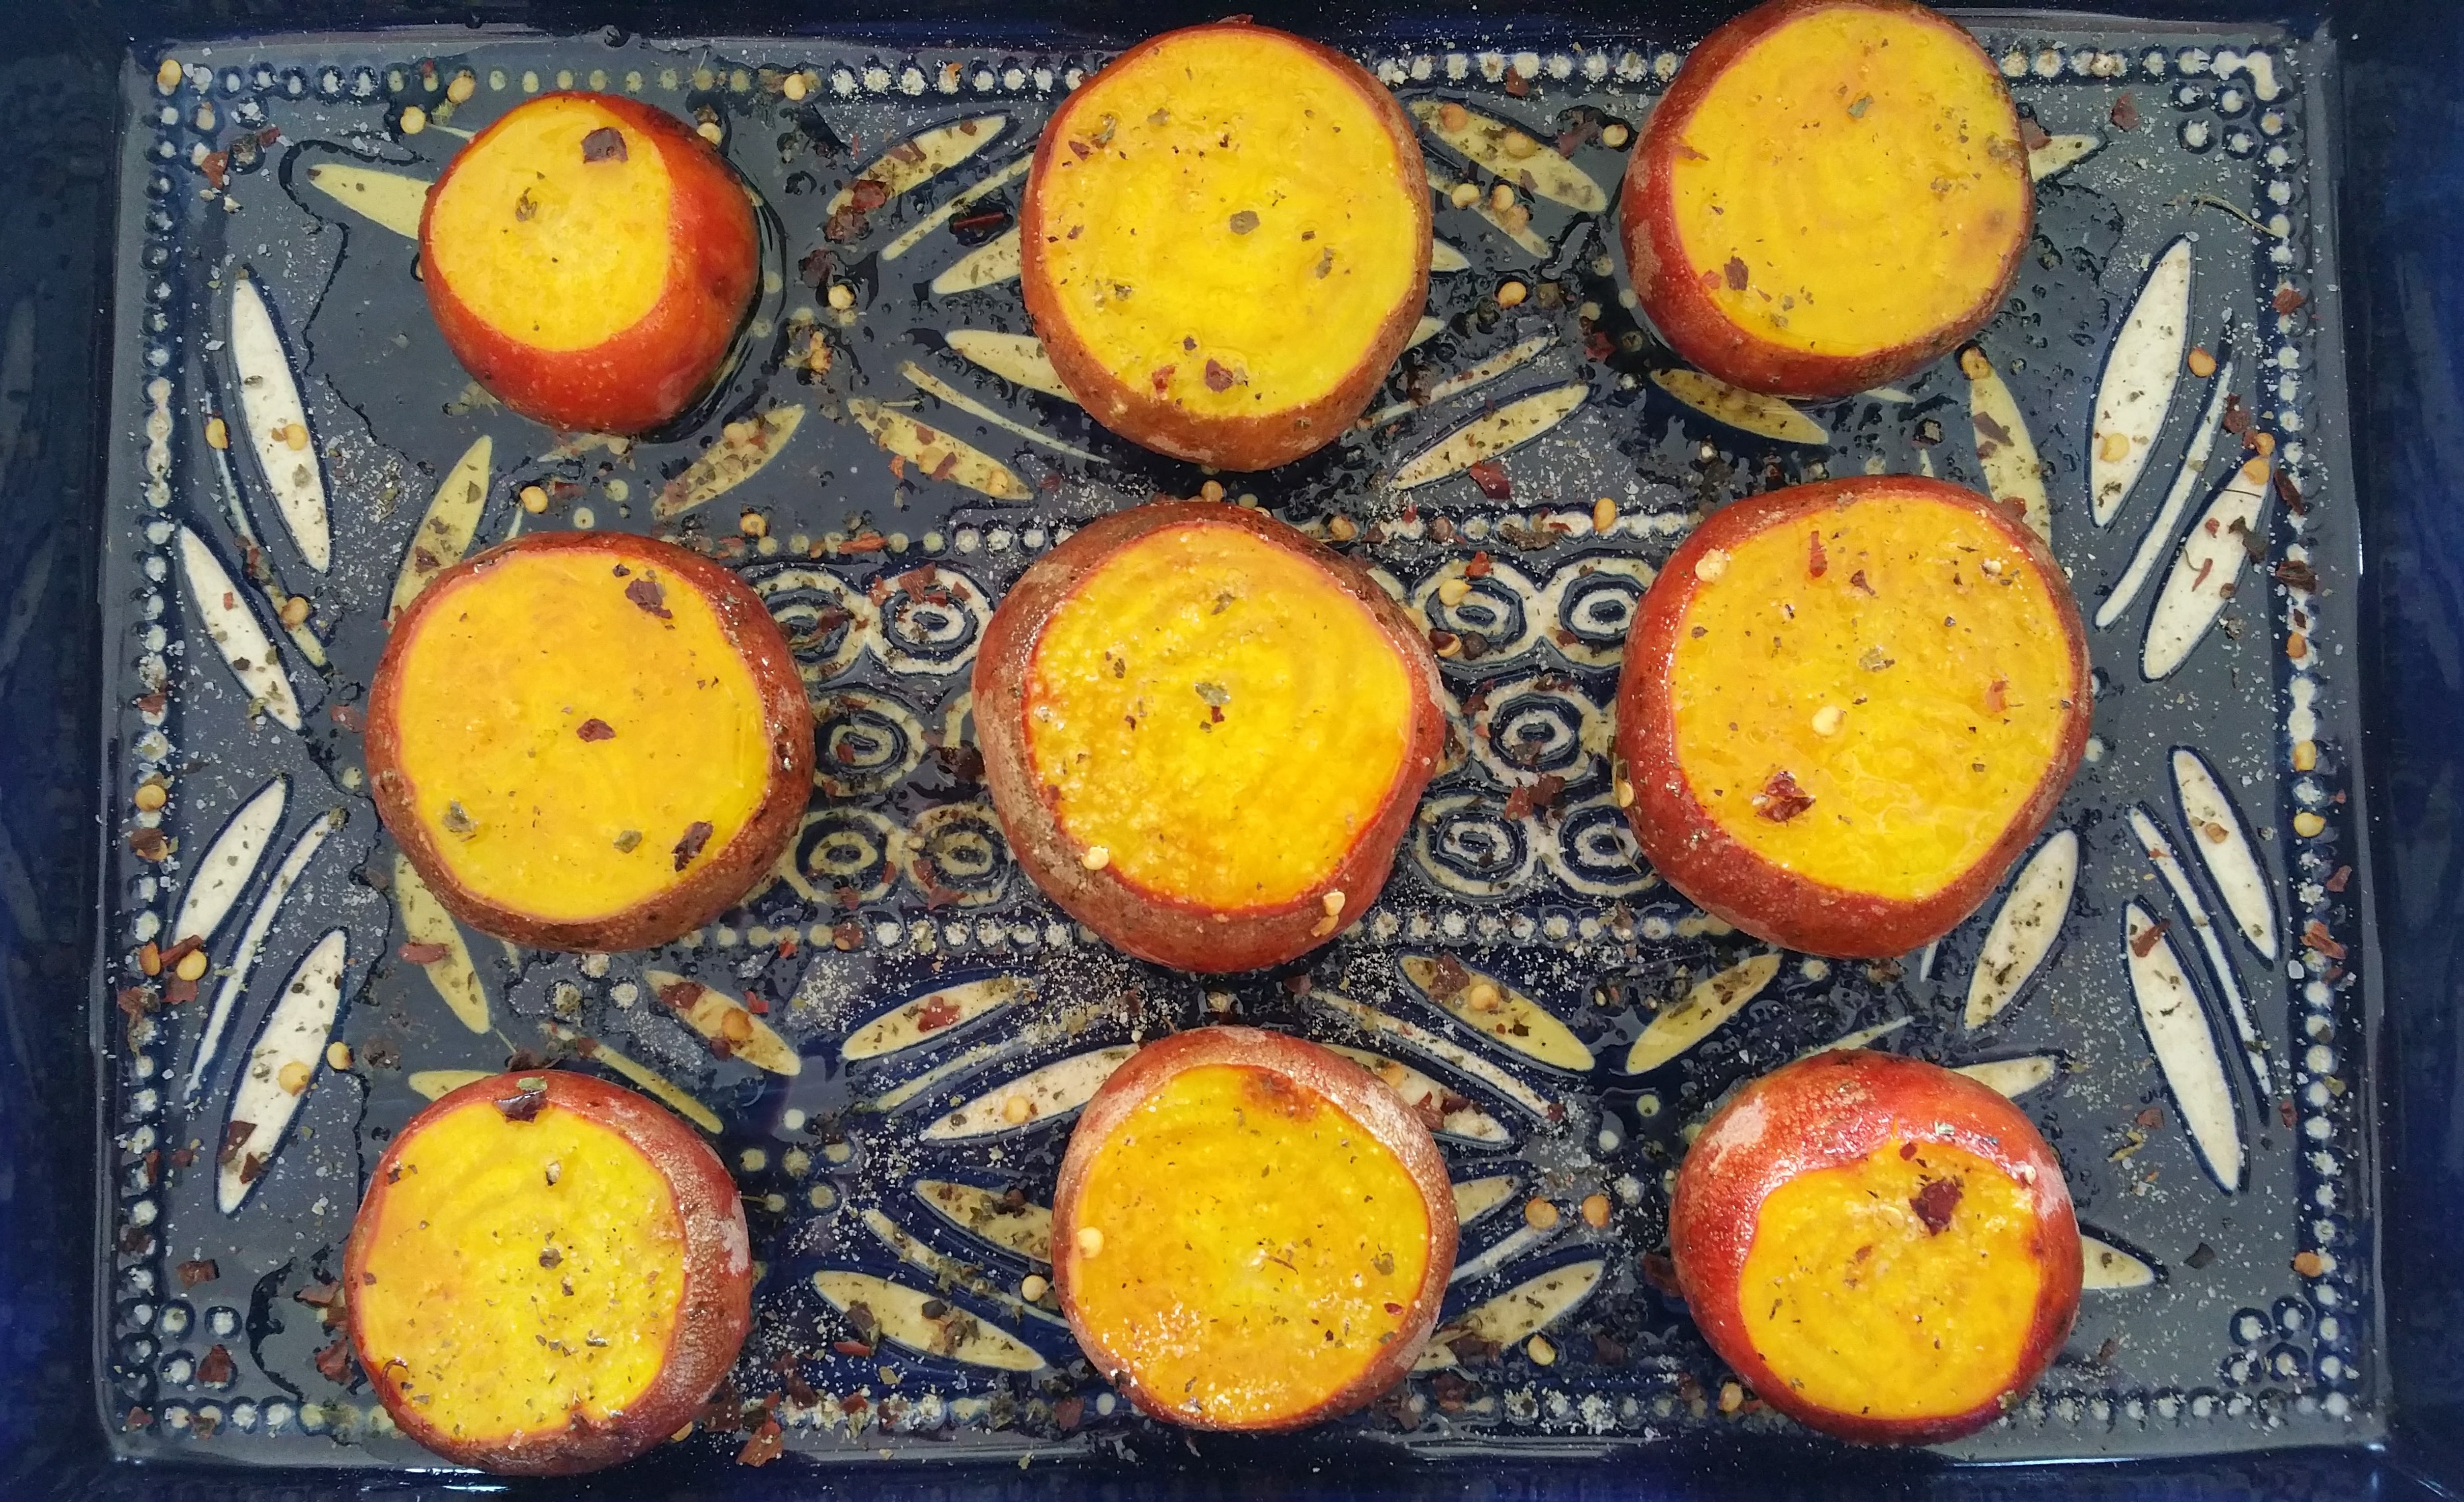 Golden Beets Preped for Oven